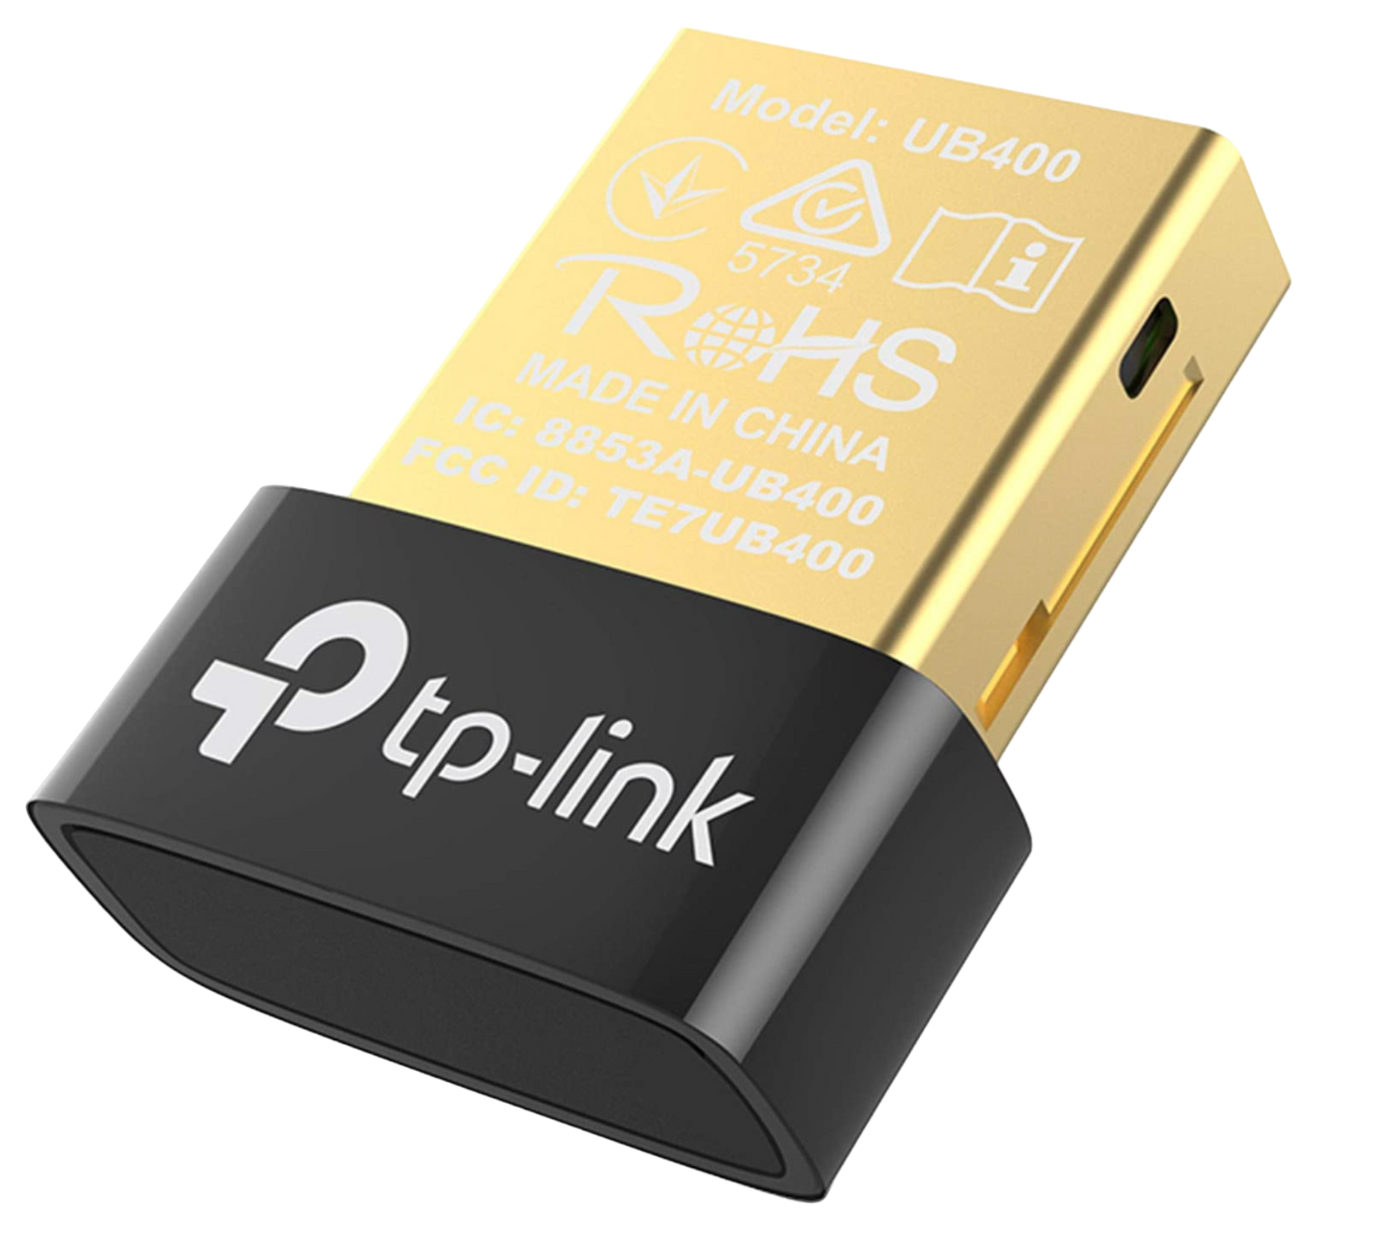 Bluetooth 4.0 Nano USB Adapter by TP-Link